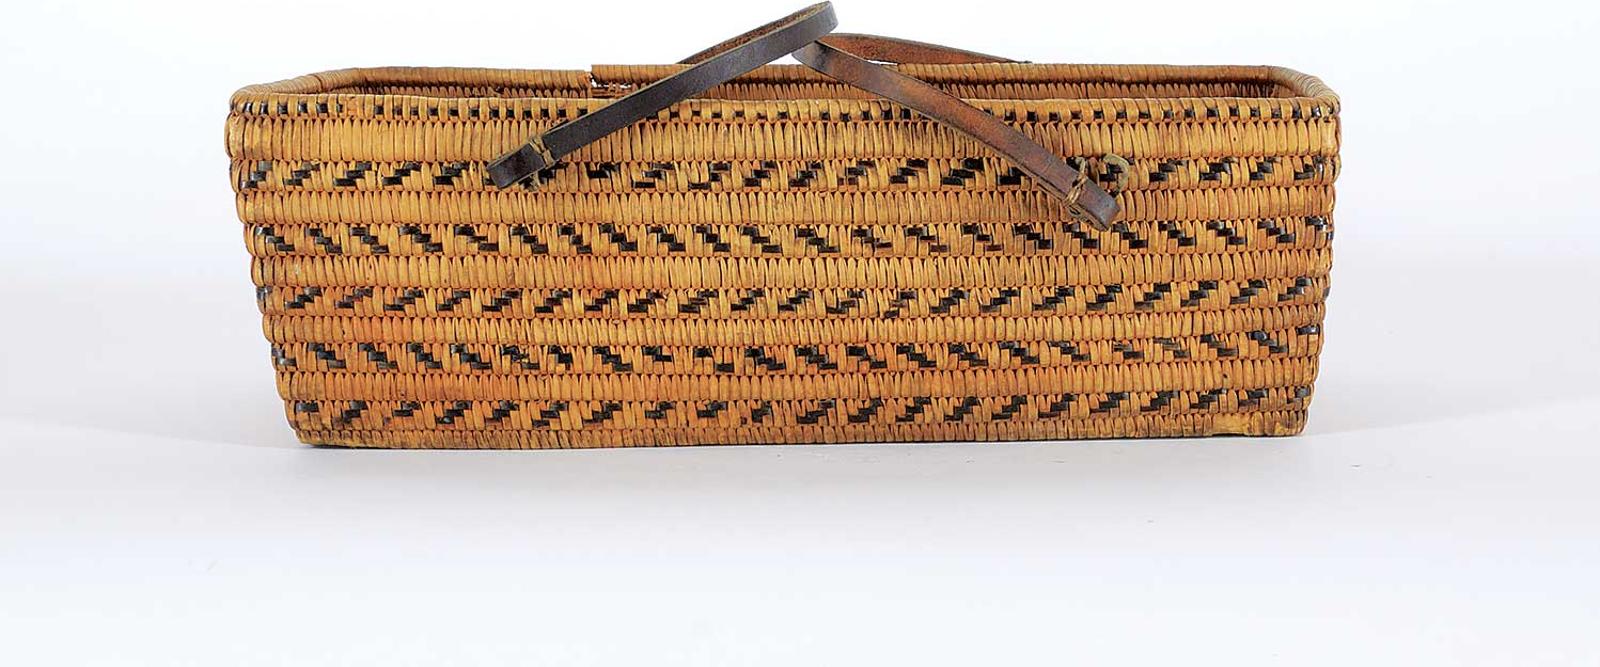 Northwest Coast First Nations School - Rectangular Basket with Two Leather Handles